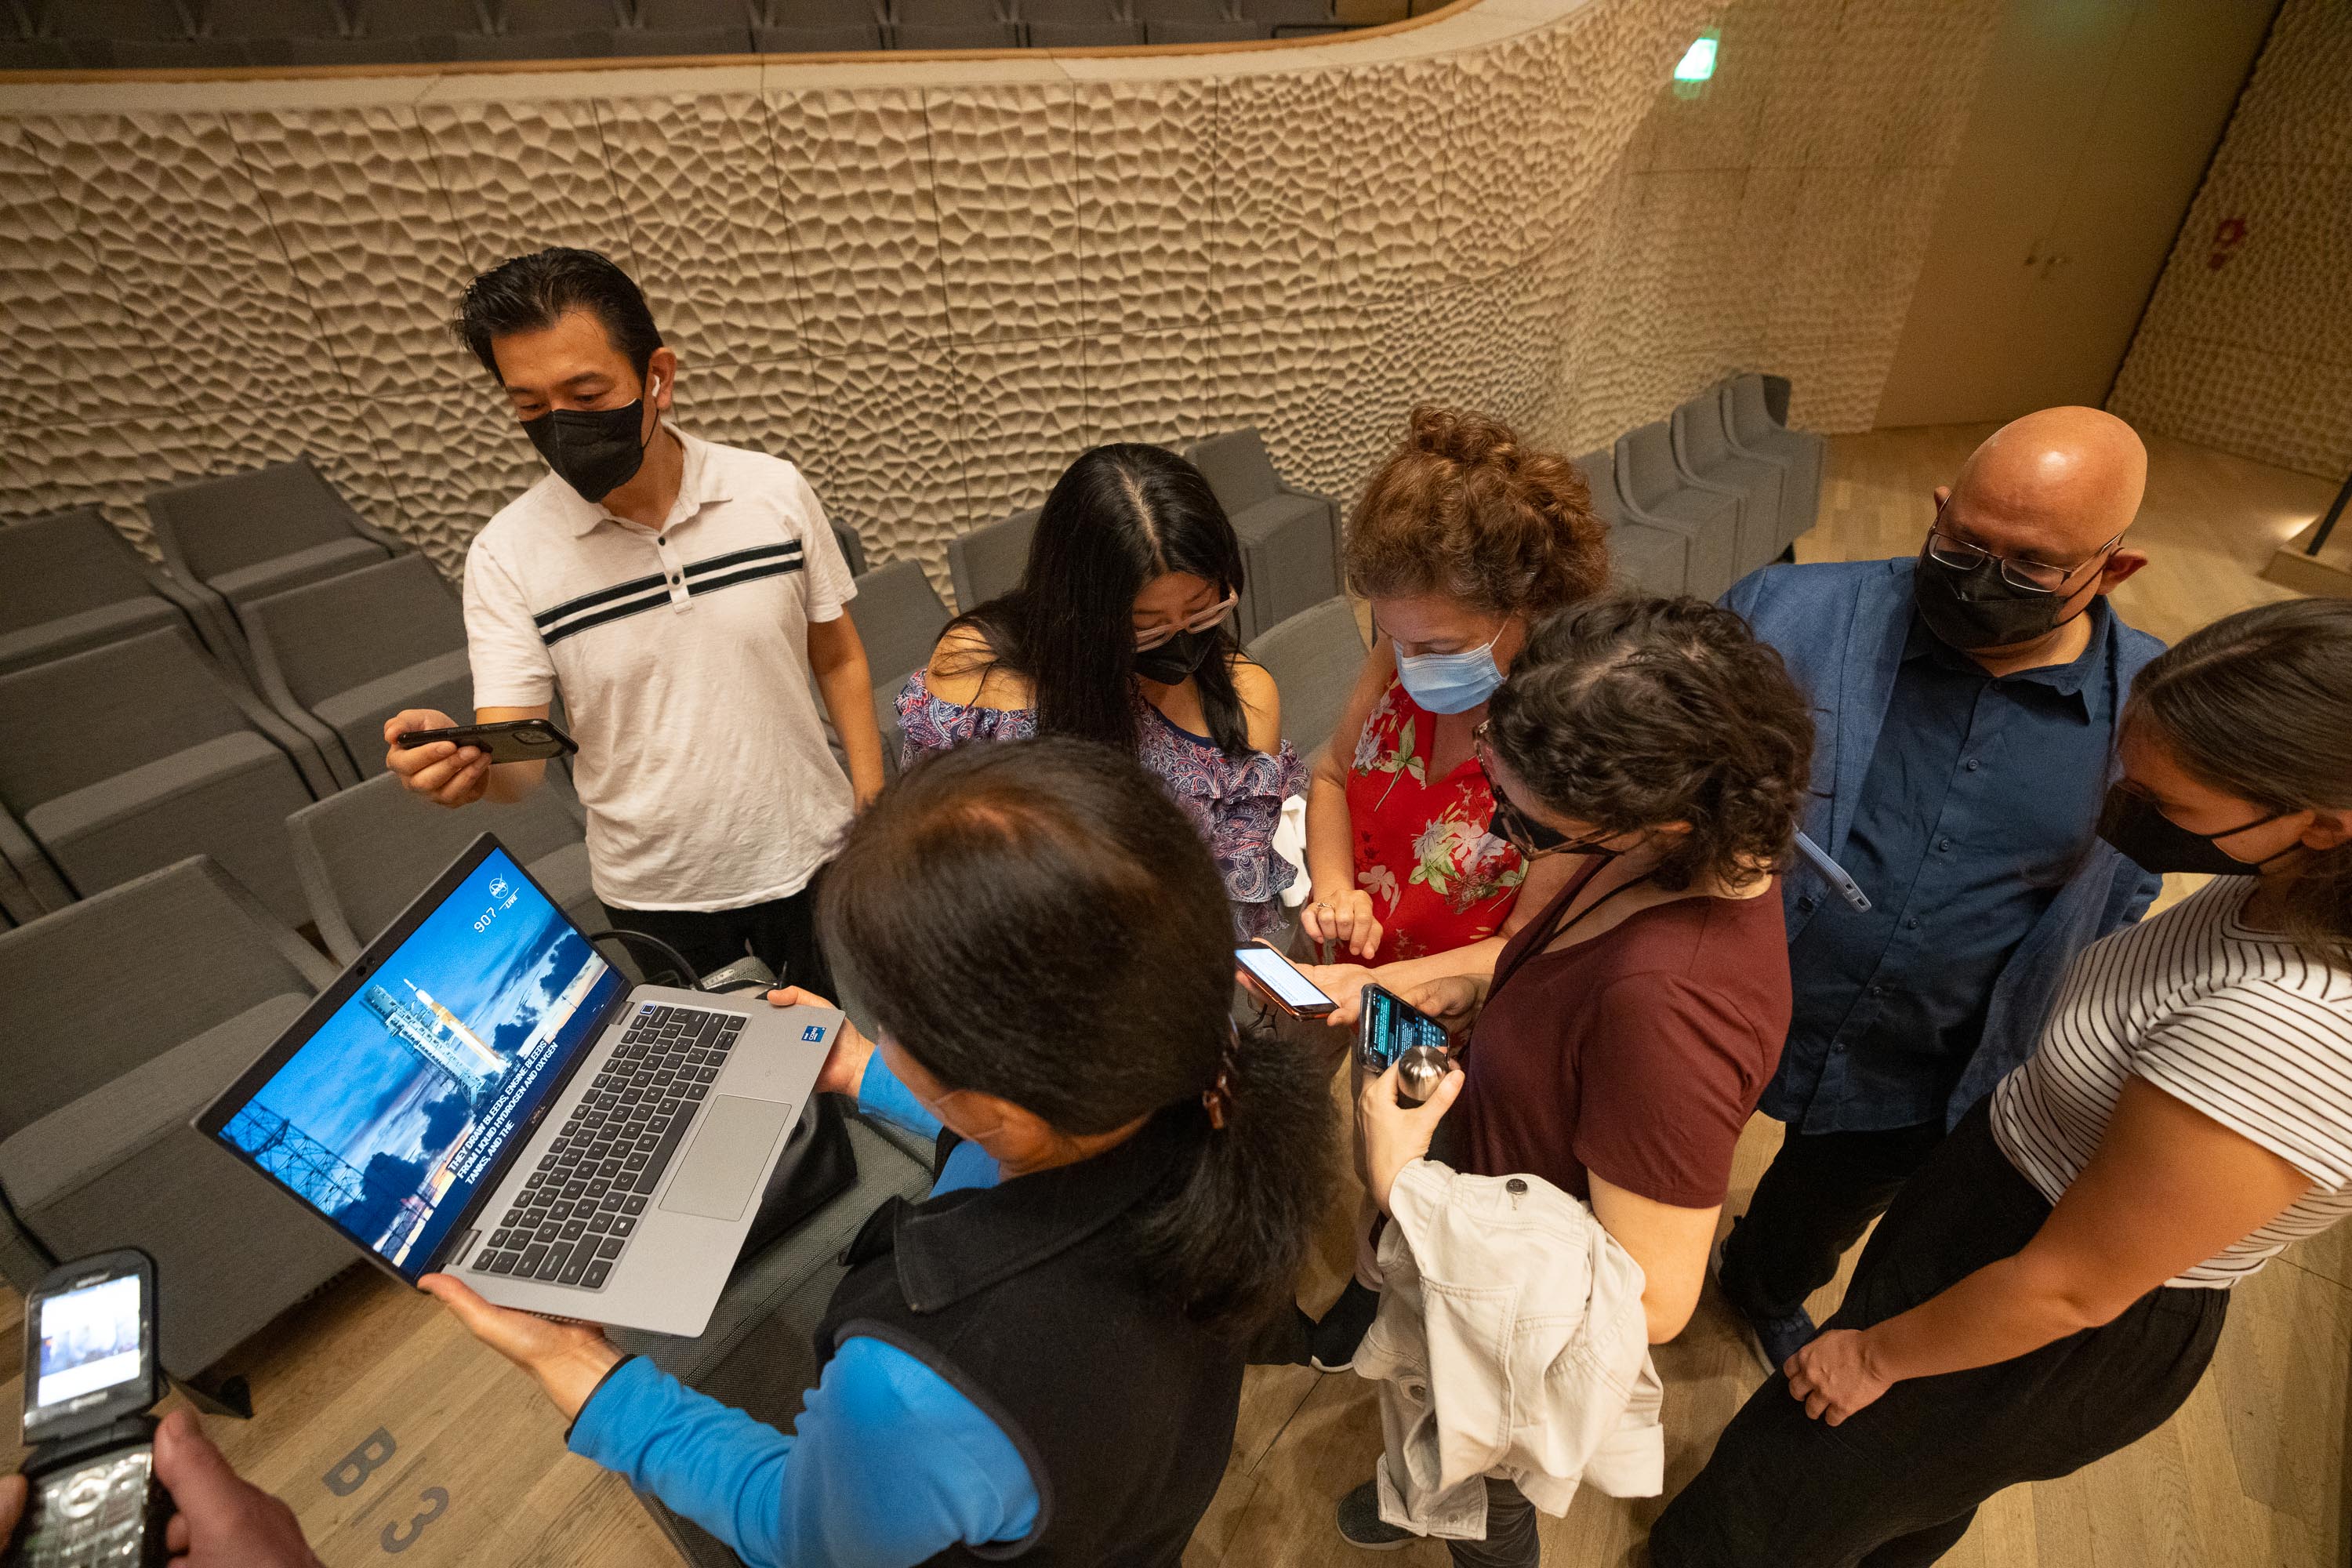 Musicians gather around phones and a laptop at the Elbphilharmonie to watch the launch of NASA’s Artemis I